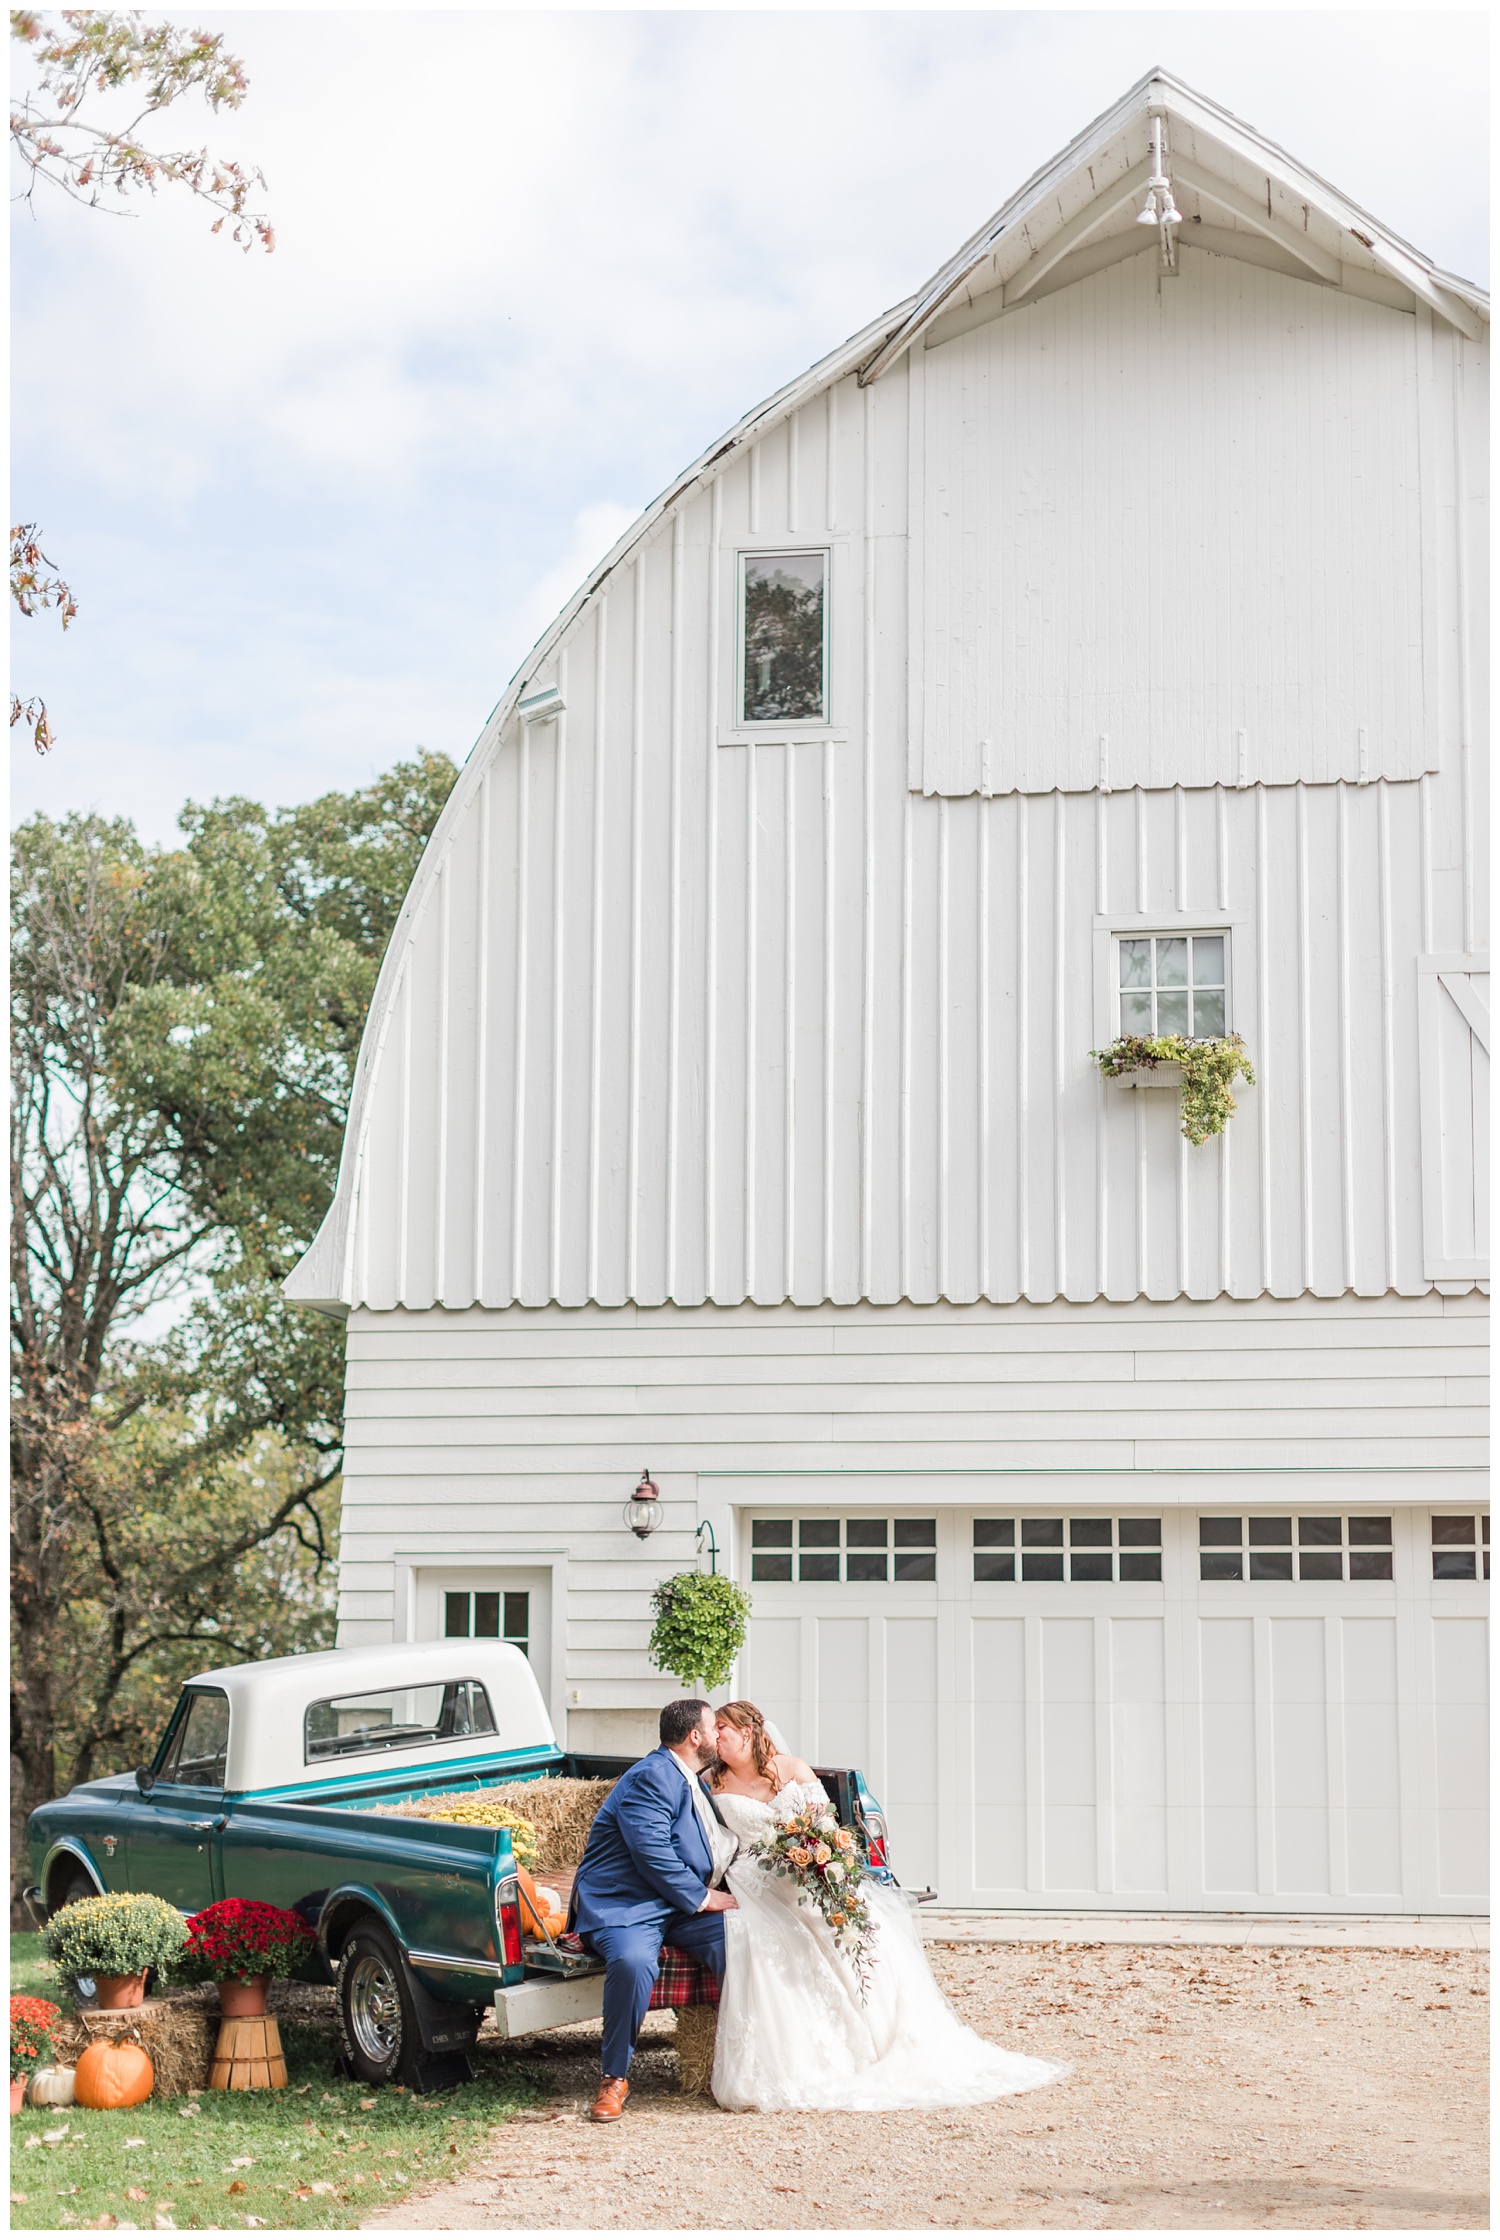 Bride and groom kiss in the back of an old Chevy truck in front of the white barn at Diamond Oak Events | CB Studio